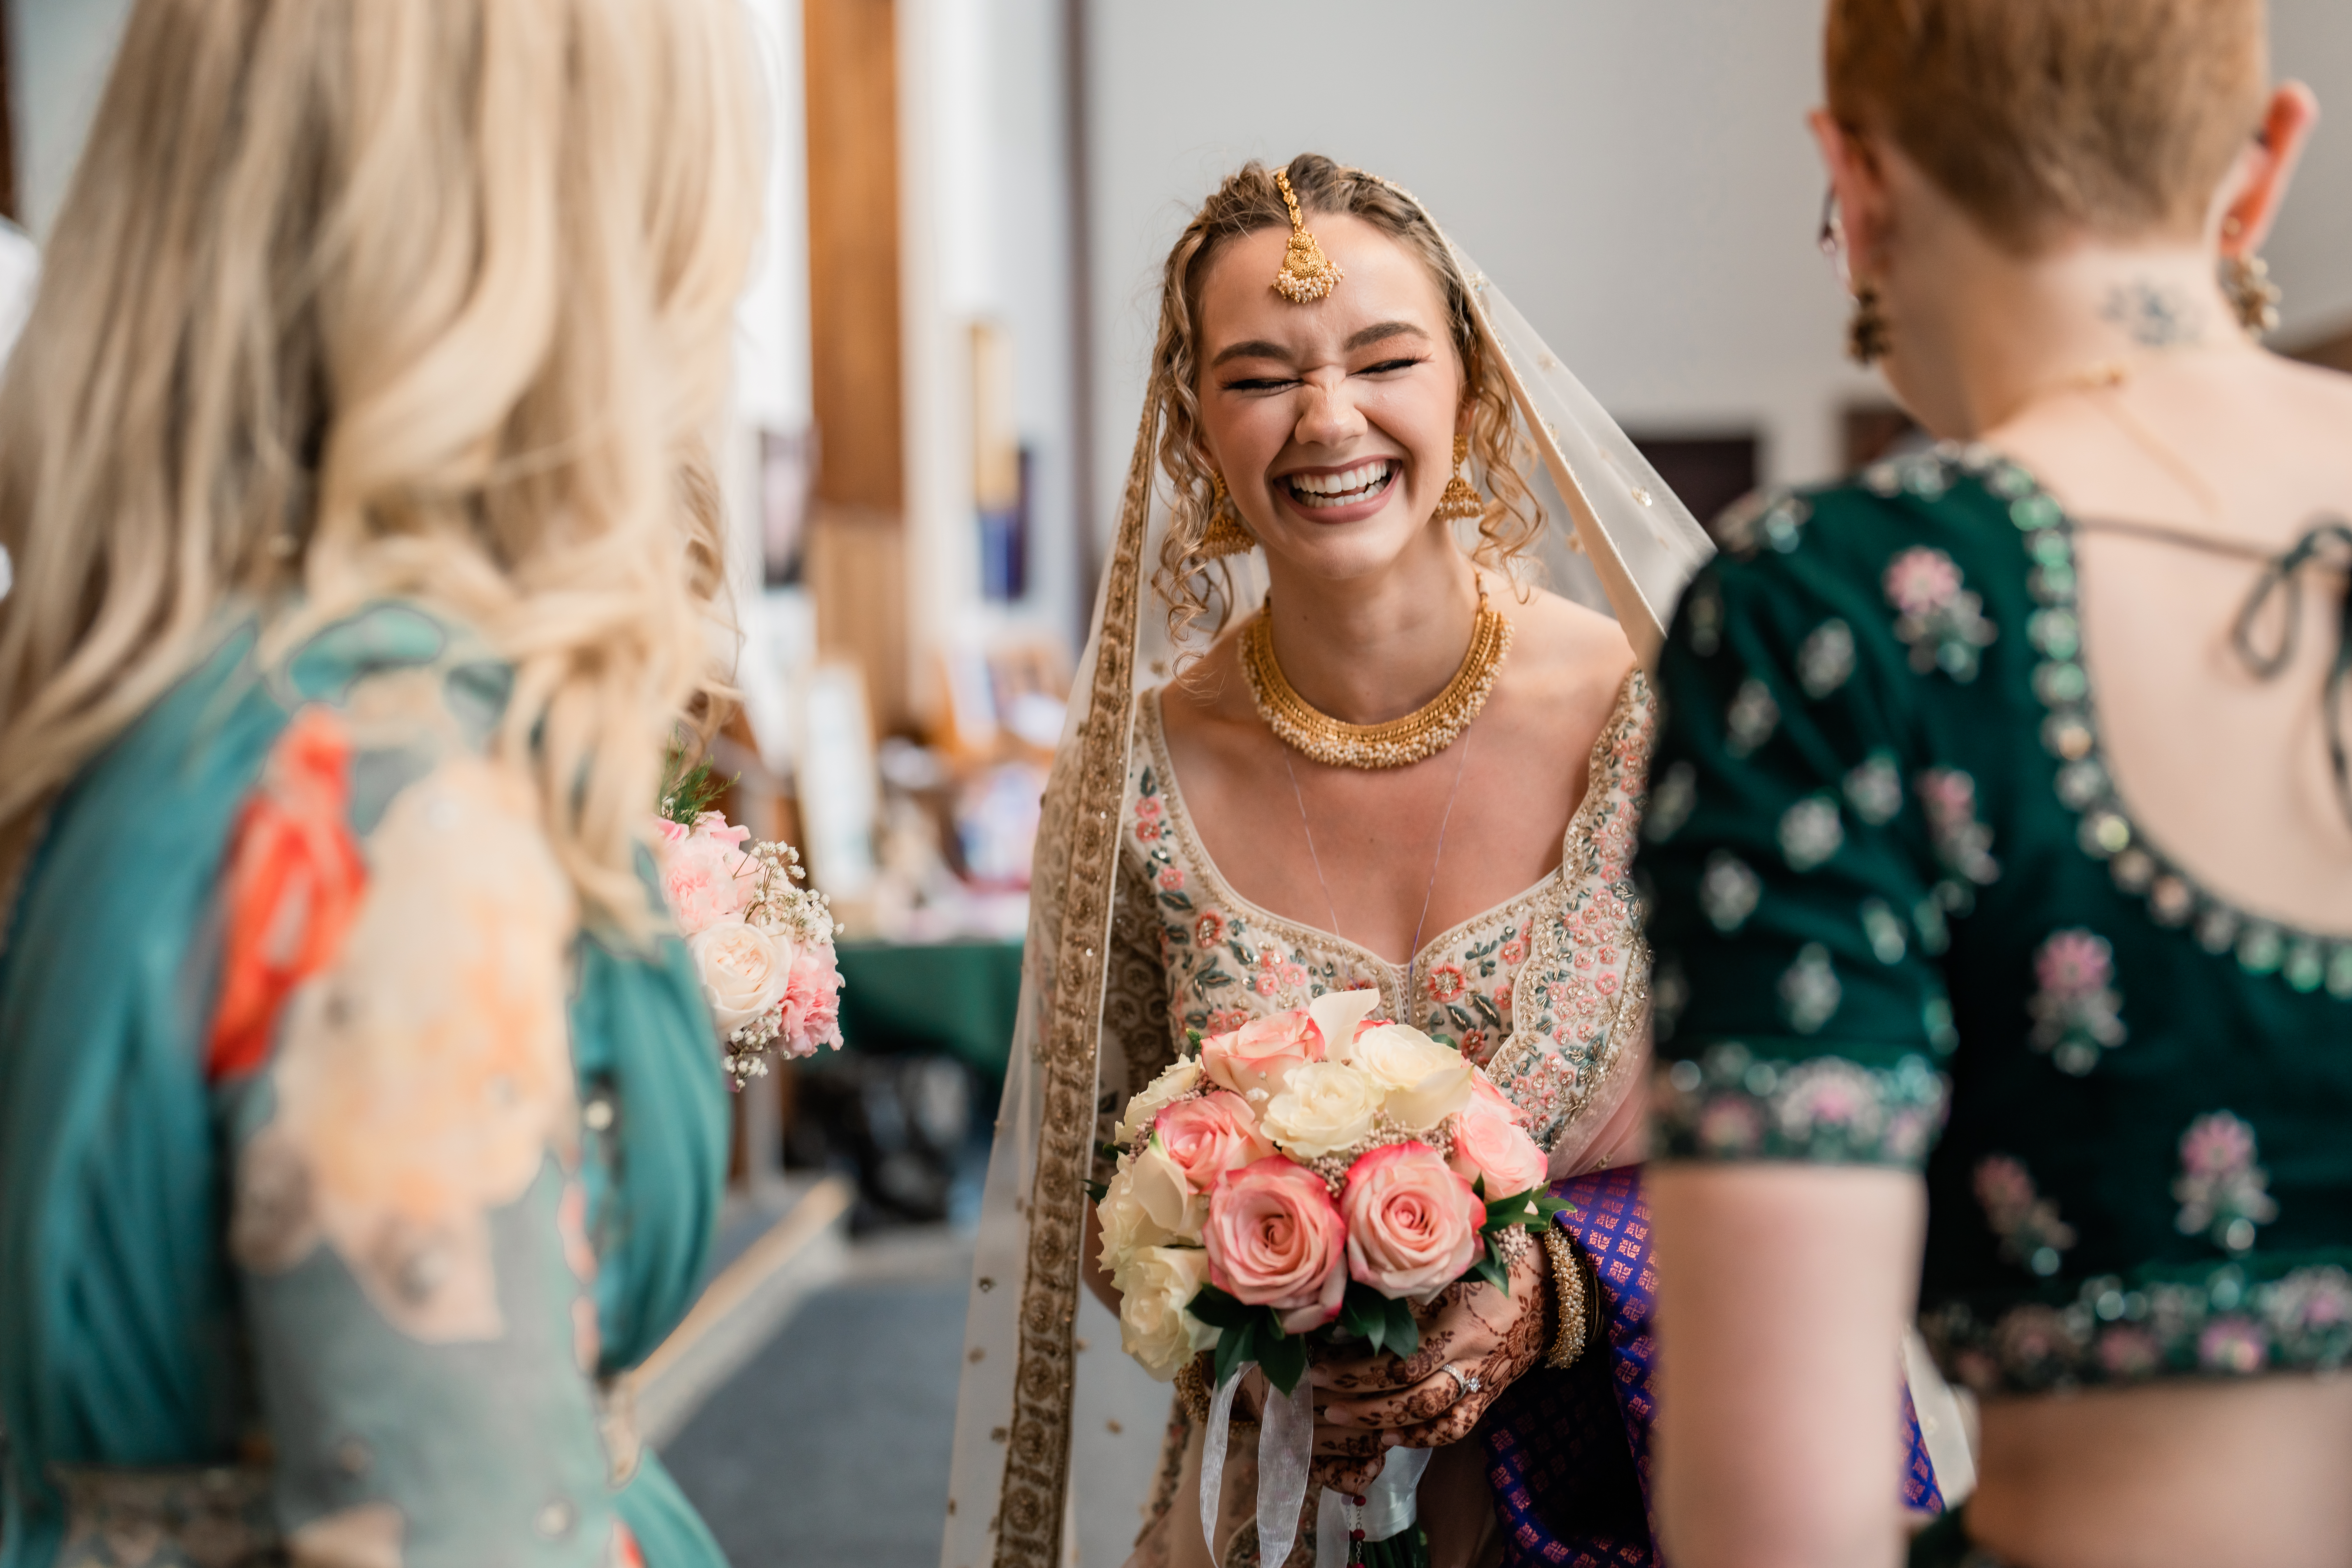 New Jersey Wedding Photographer, NJ Wedding Venue, New Jersey Weddings, NJ Wedding Photographer, Jersey Weddings, NJ Wedding Photographer, NJ Summer Wedding, Summer Wedding, Bride is laughing and smiling at her sister as she is wearing a traditional Indian Saree.